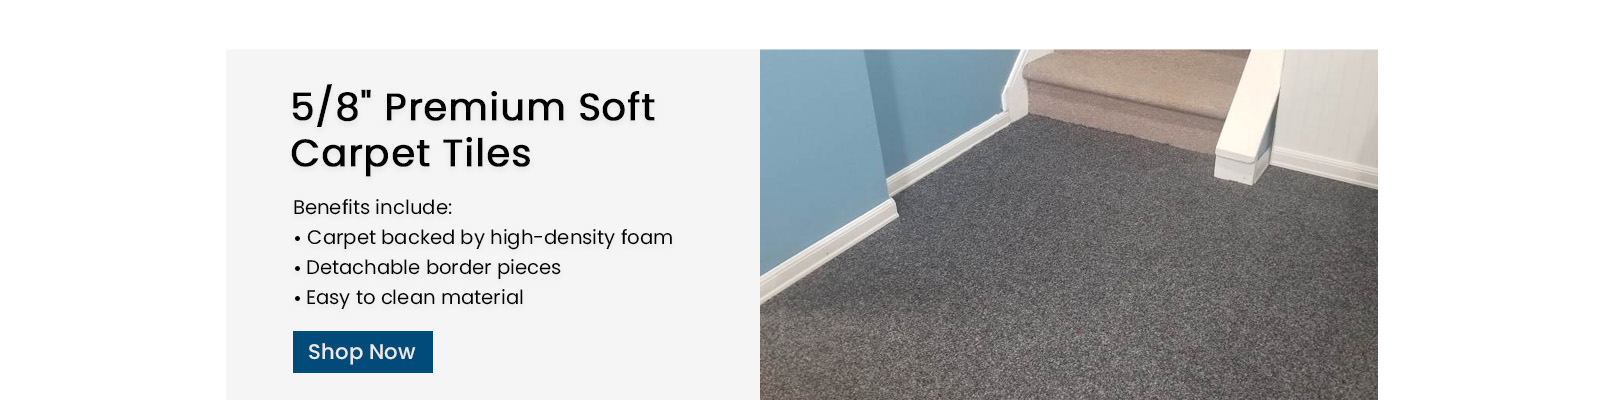 5 8th inch premium soft carpet tiles. Benefits include carpet backed by high density foam. Detachable border peices. Easy to clean material. Shop Now